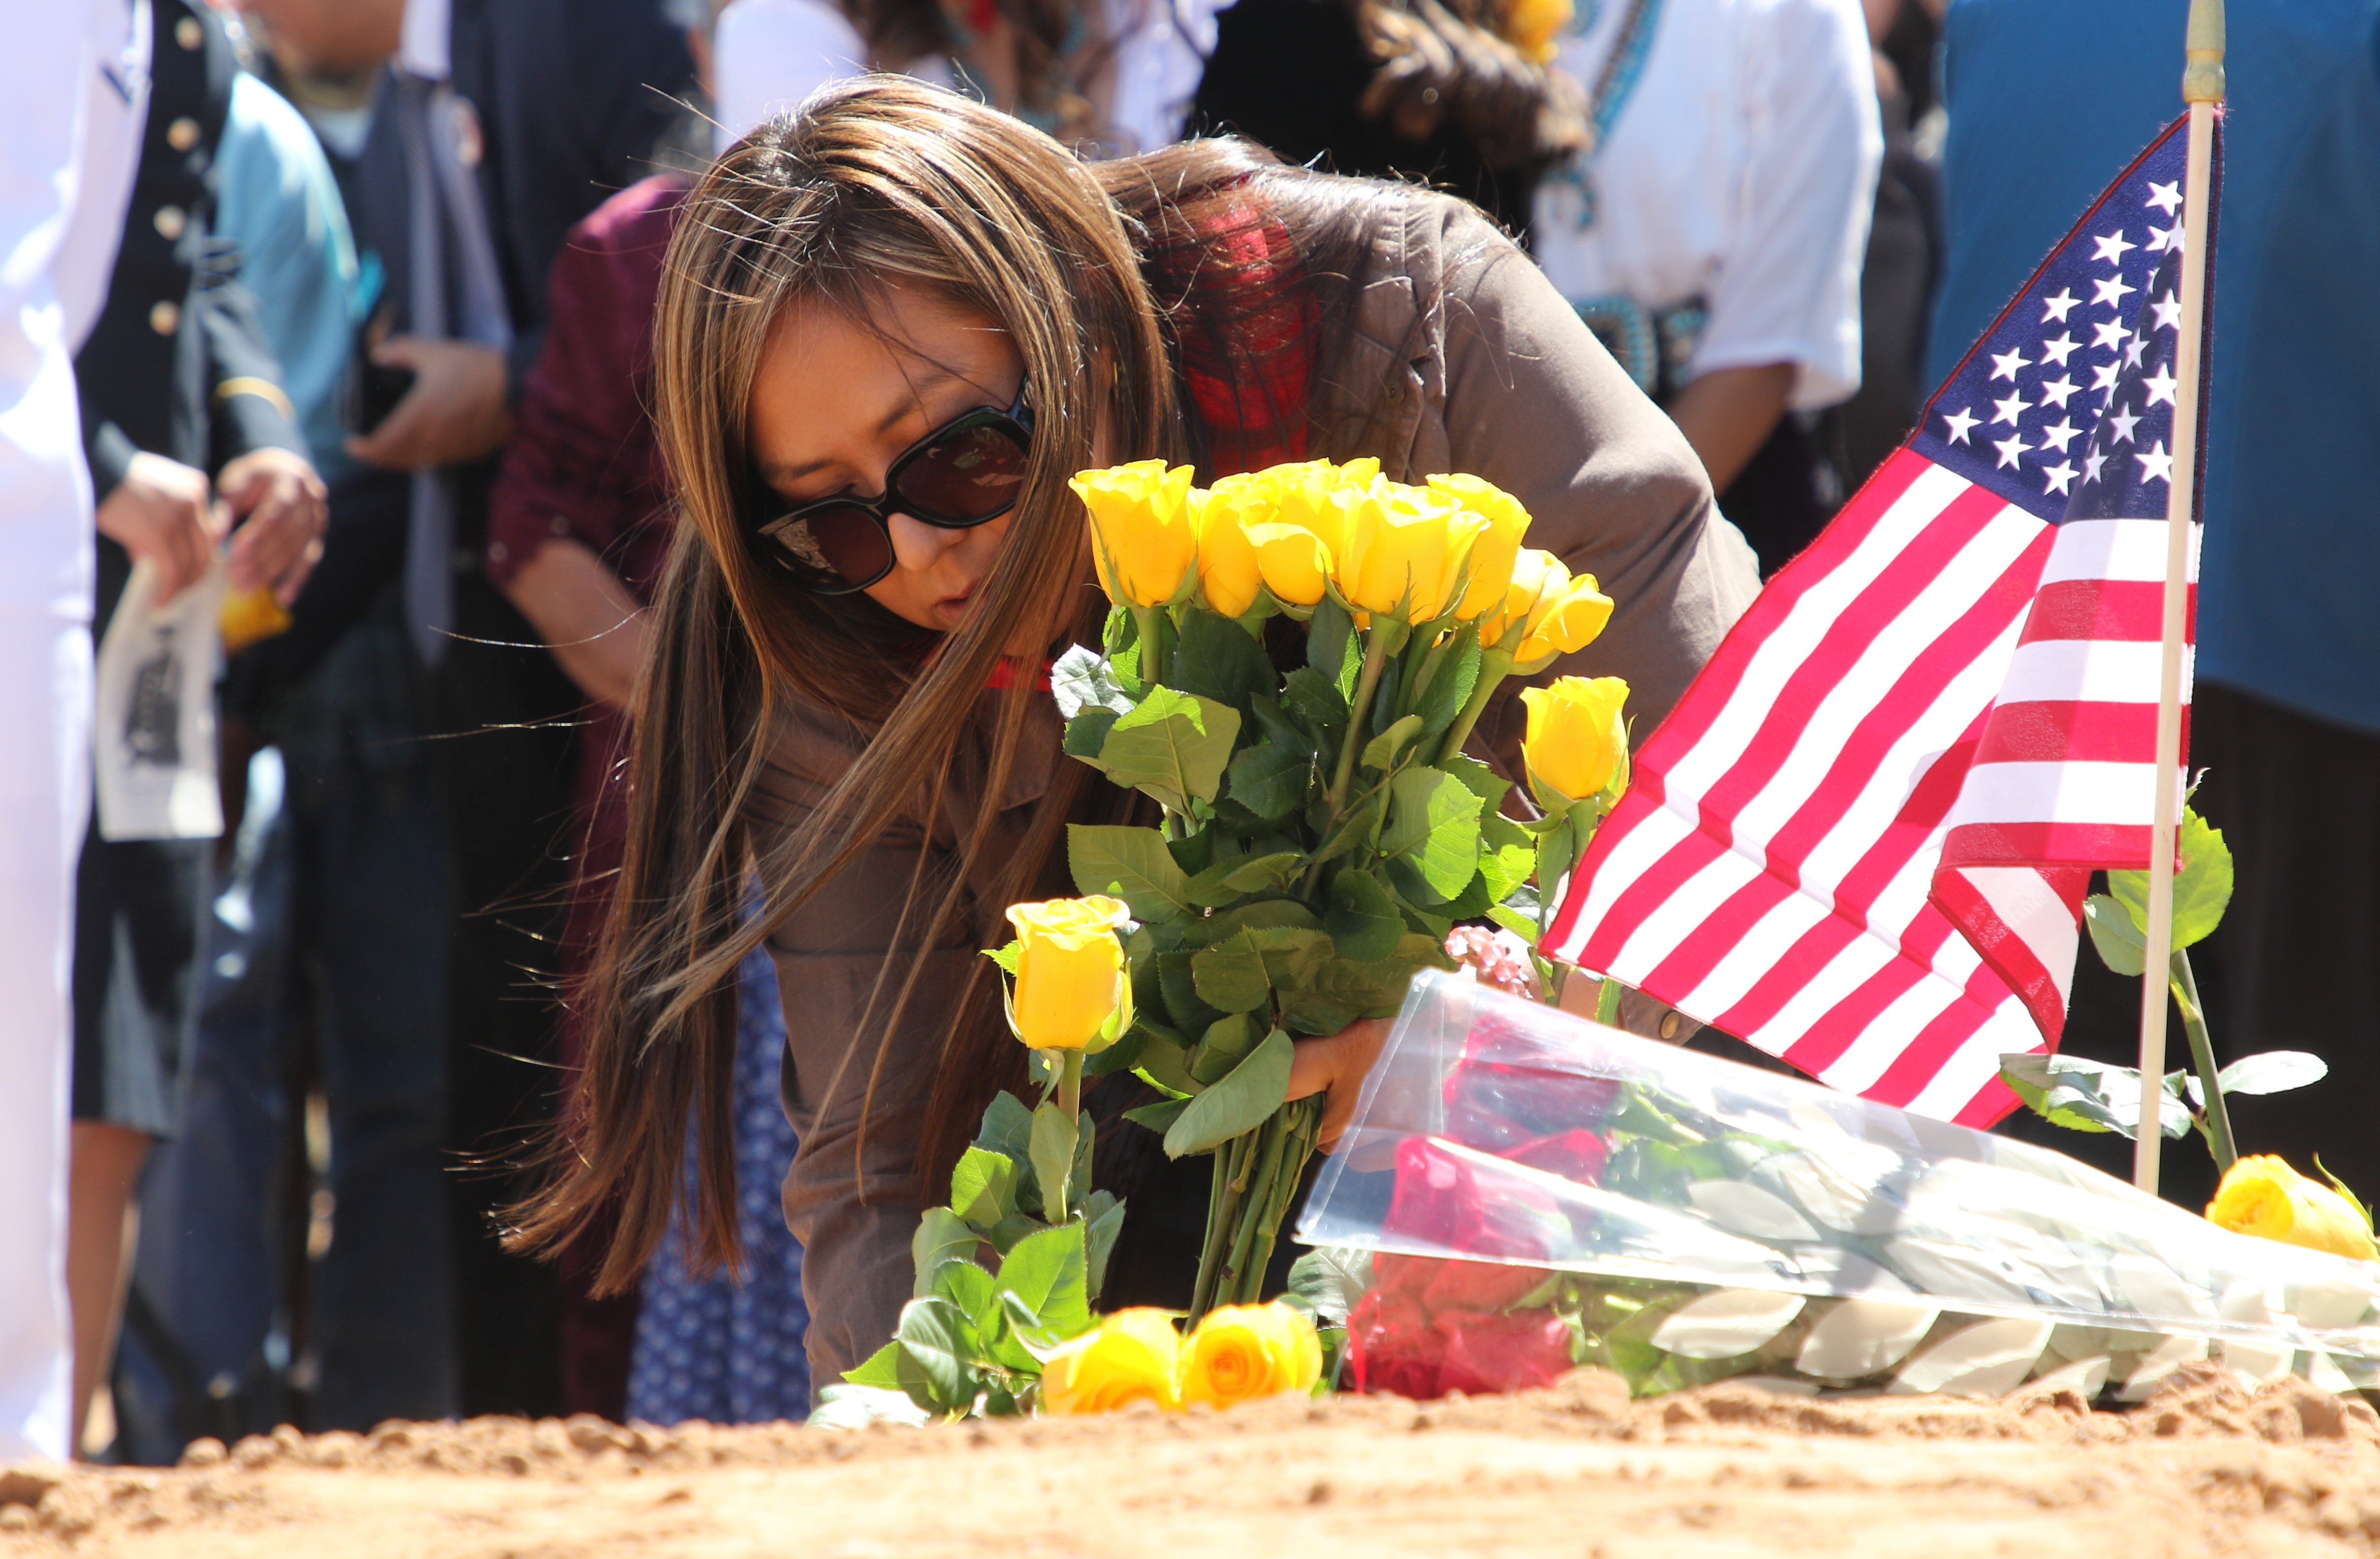 Delilah Yazzie places roses on the grave of her grandfather, Navajo Code Talker William Tully Brown Sr., on June 6 at the Fort Defiance Veterans Cemetery in Fort Defiance, Ariz.